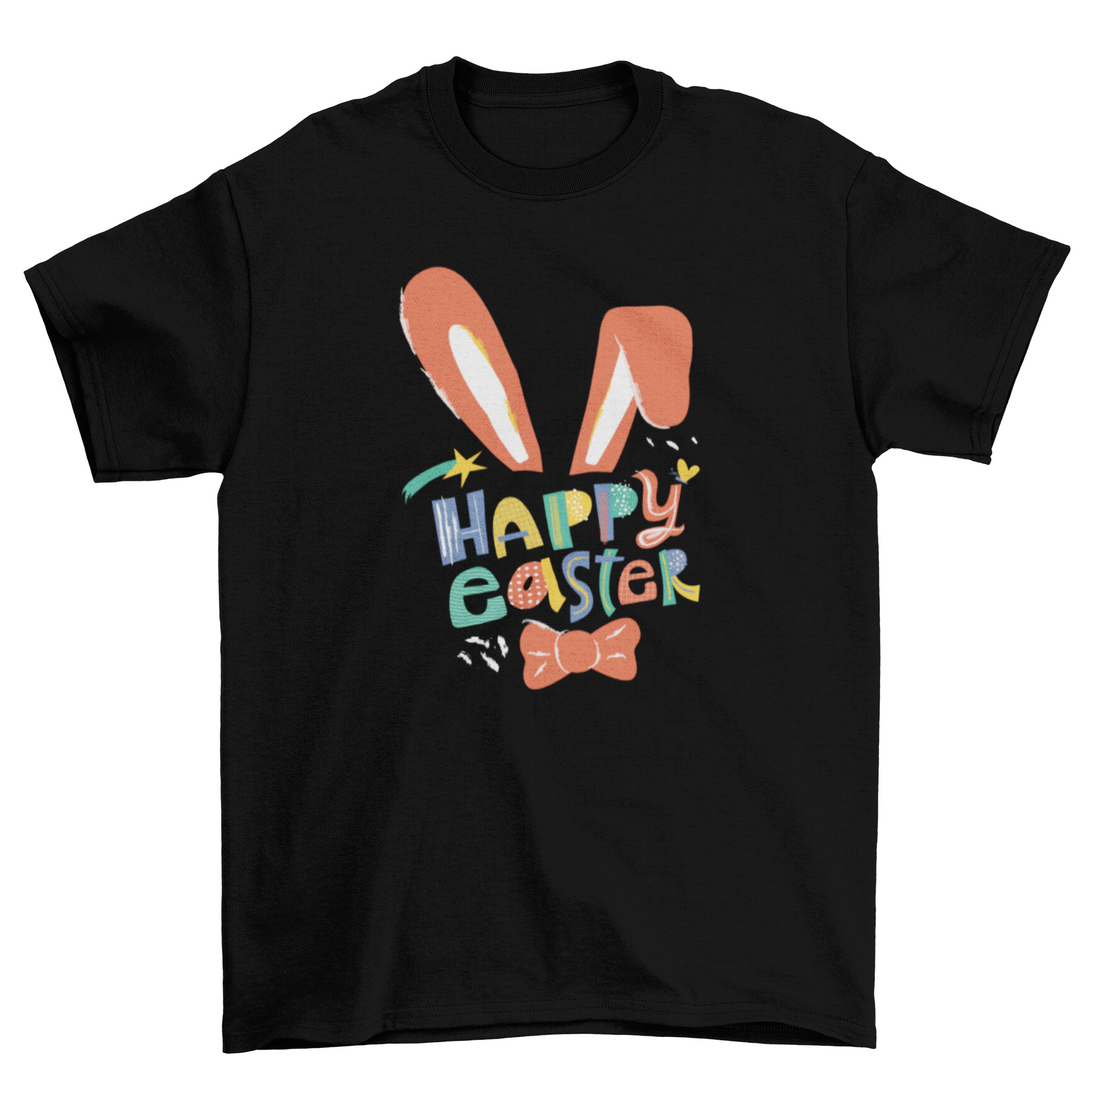 Happy easter t-shirt